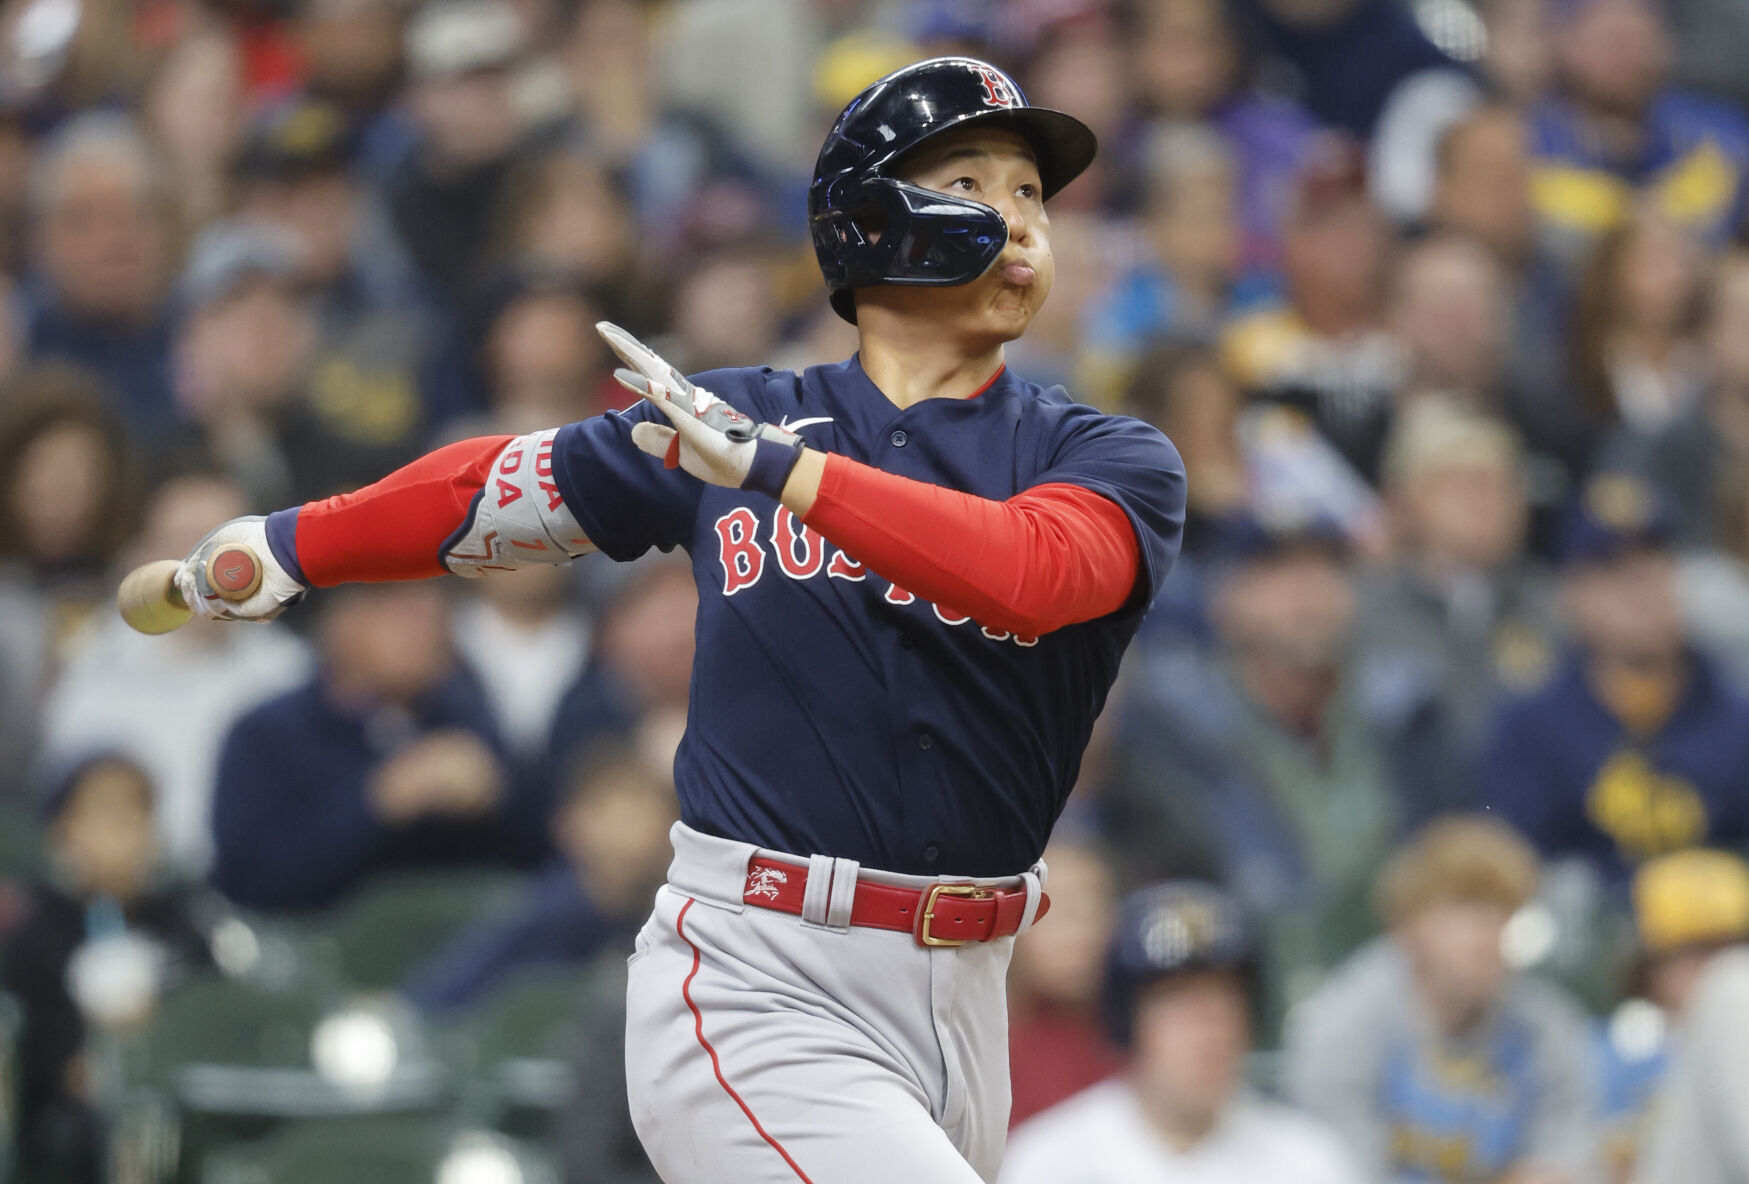 Red Sox erupt in eighth inning, rout Brewers in rubber game of series